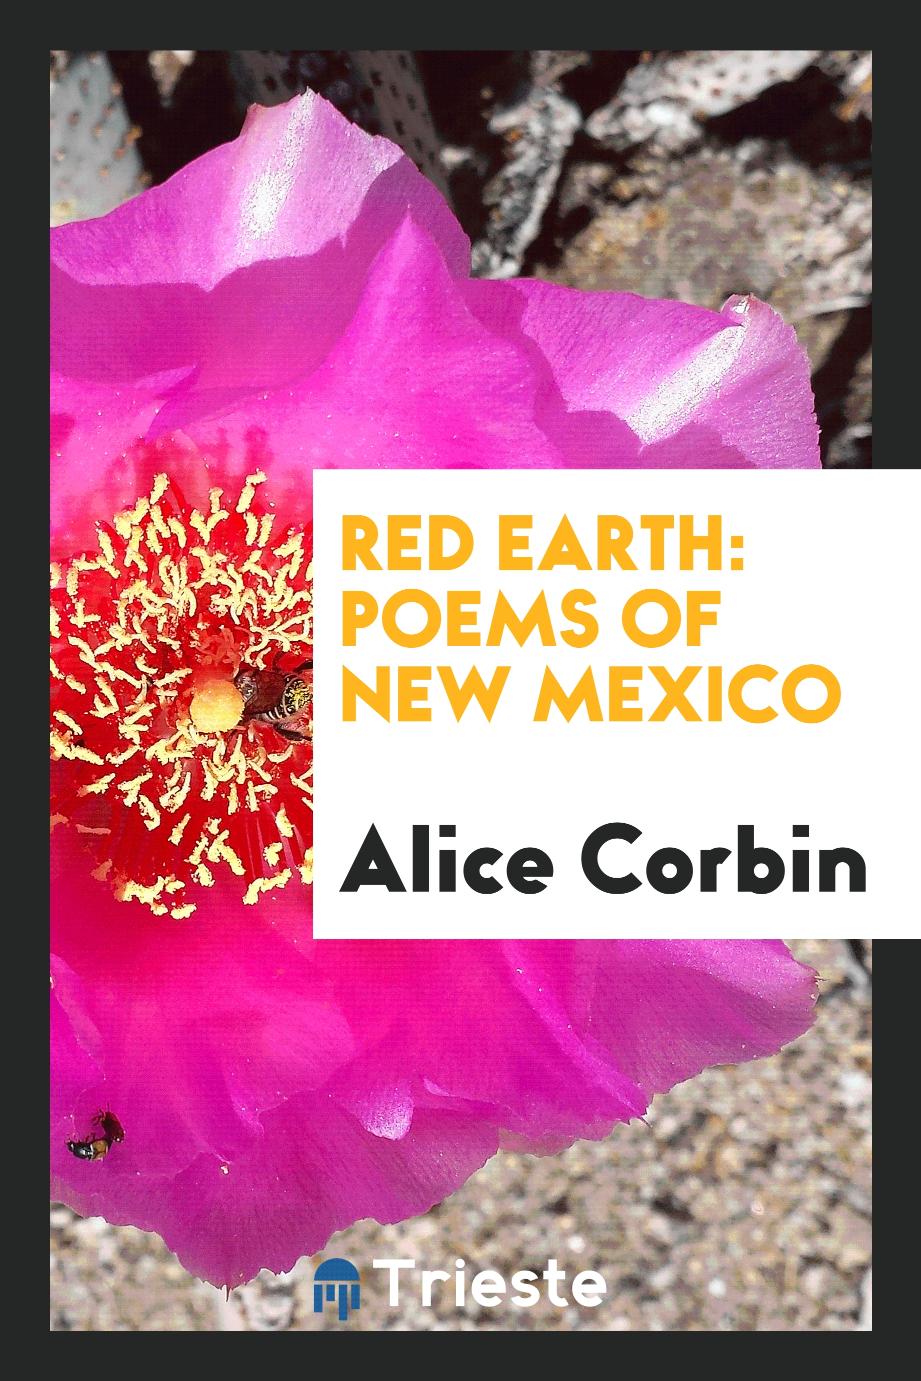 Red earth: poems of New Mexico